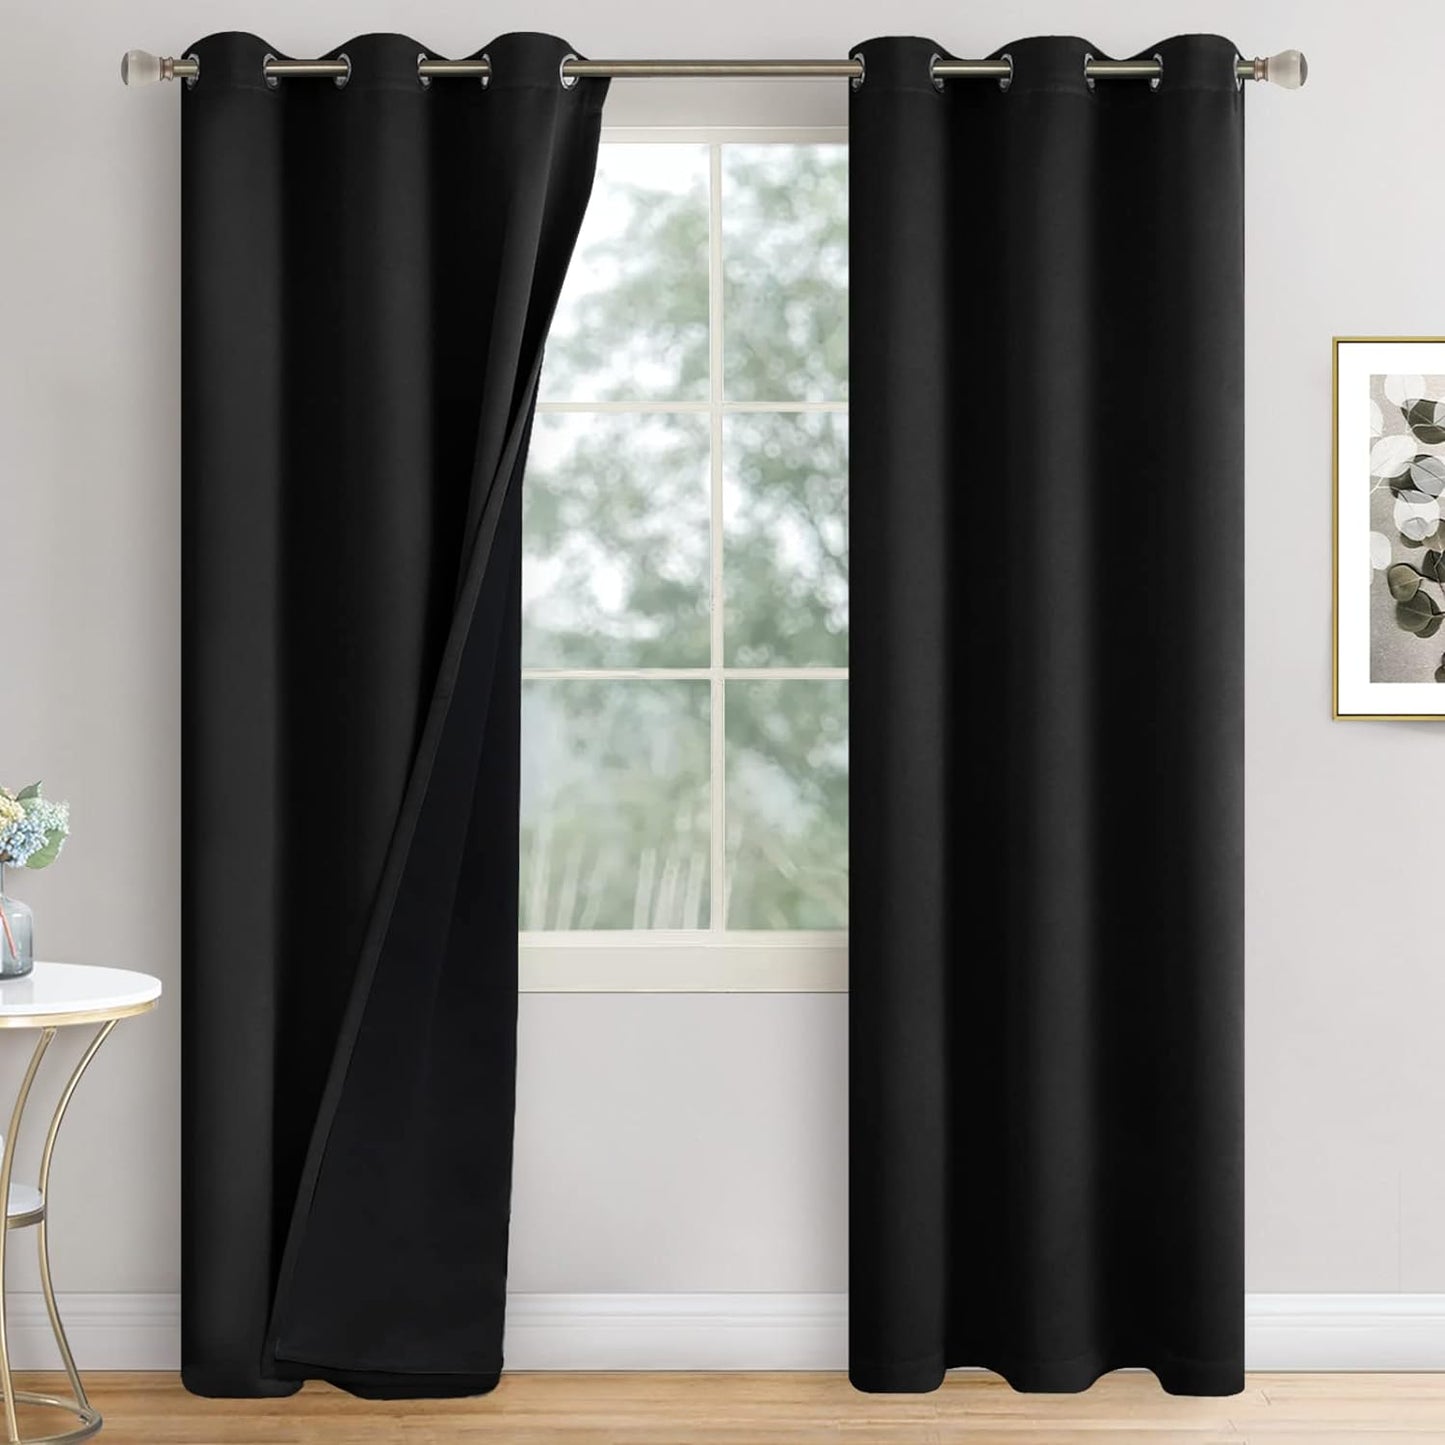 QUEMAS Short Blackout Curtains 54 Inch Length 2 Panels, 100% Light Blocking Thermal Insulated Soundproof Grommet Small Window Curtains for Bedroom Basement with Black Liner, Each 42 Inch Wide, White  QUEMAS Black + Black Lining W42 X L84 